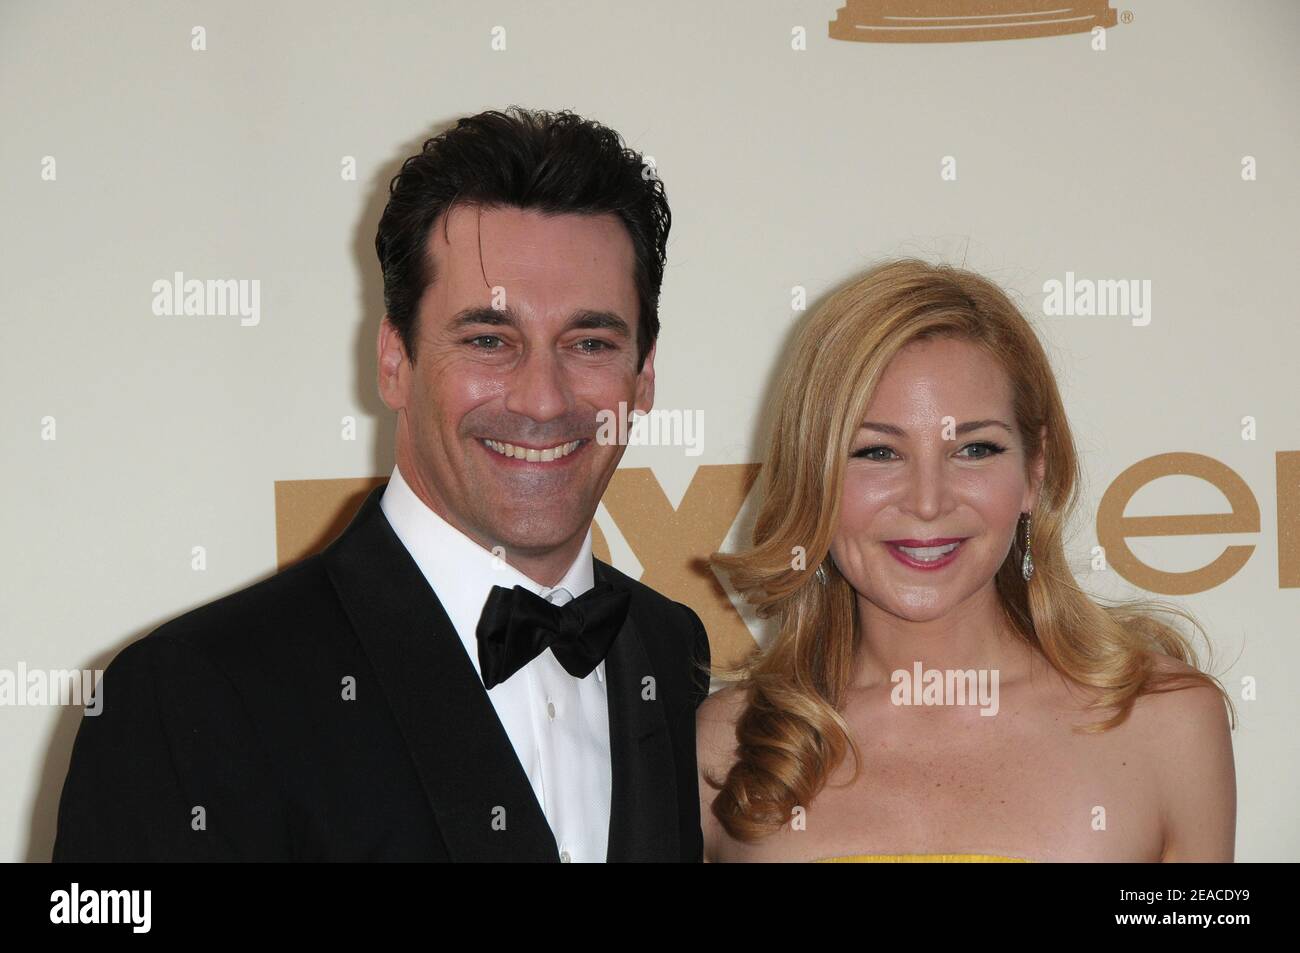 Jon Hamm and Jennifer Westfeldt at 2011 Primetime Emmy Awards at the Nokia Theatre L.A. Live in downtown Los Angeles CA Stock Photo